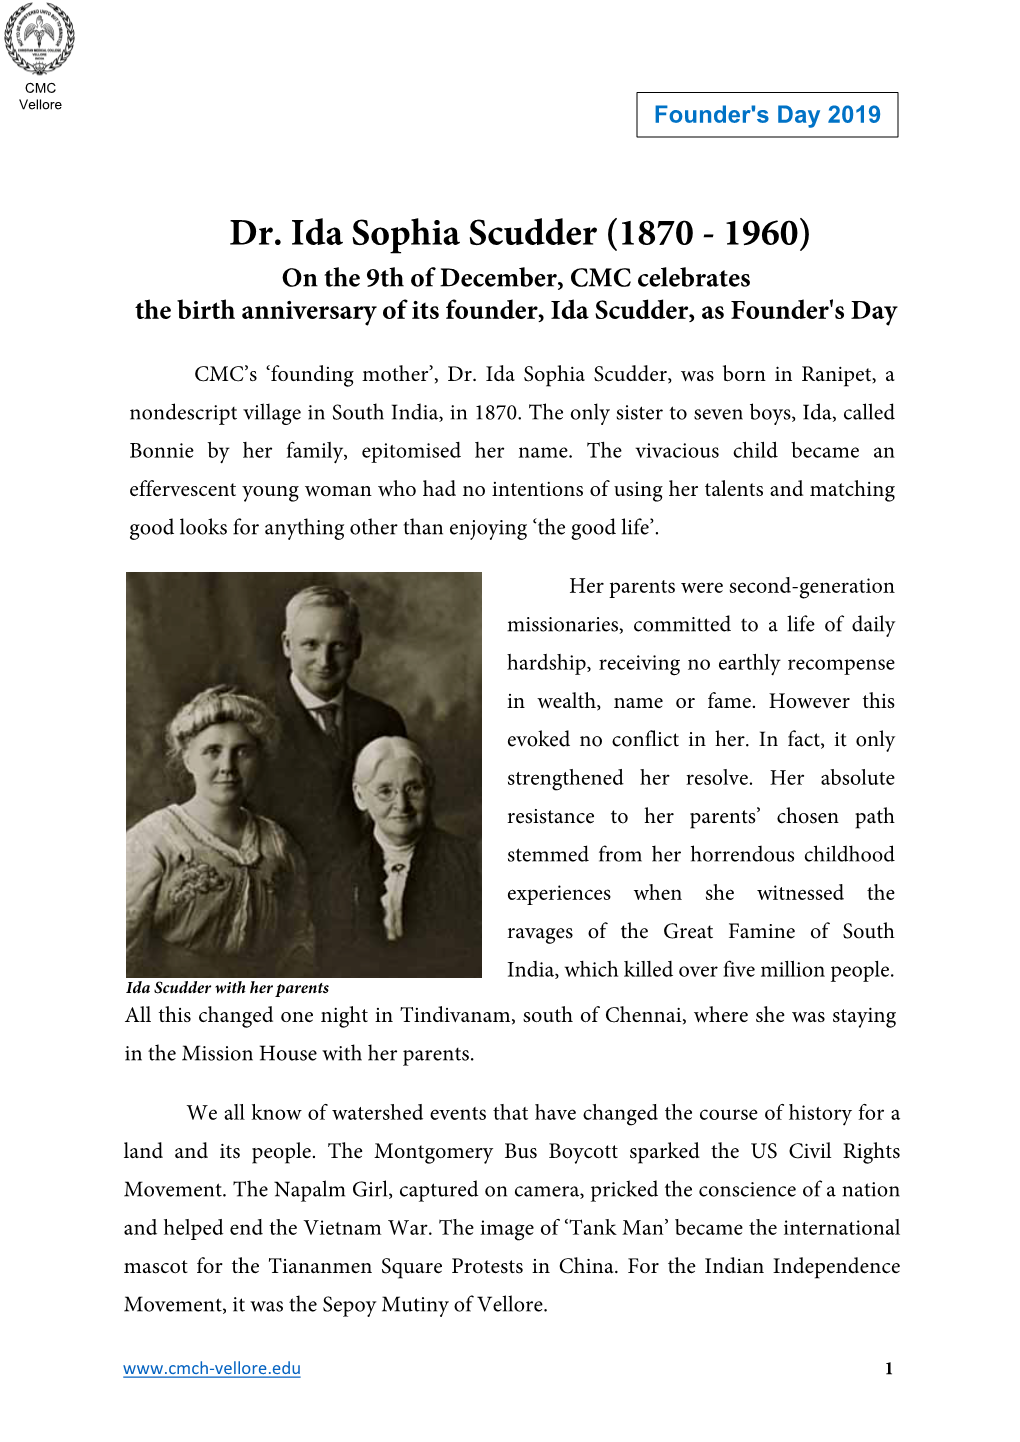 Dr. Ida Sophia Scudder (1870 - 1960) on the 9Th of December, CMC Celebrates the Birth Anniversary of Its Founder, Ida Scudder, As Founder's Day